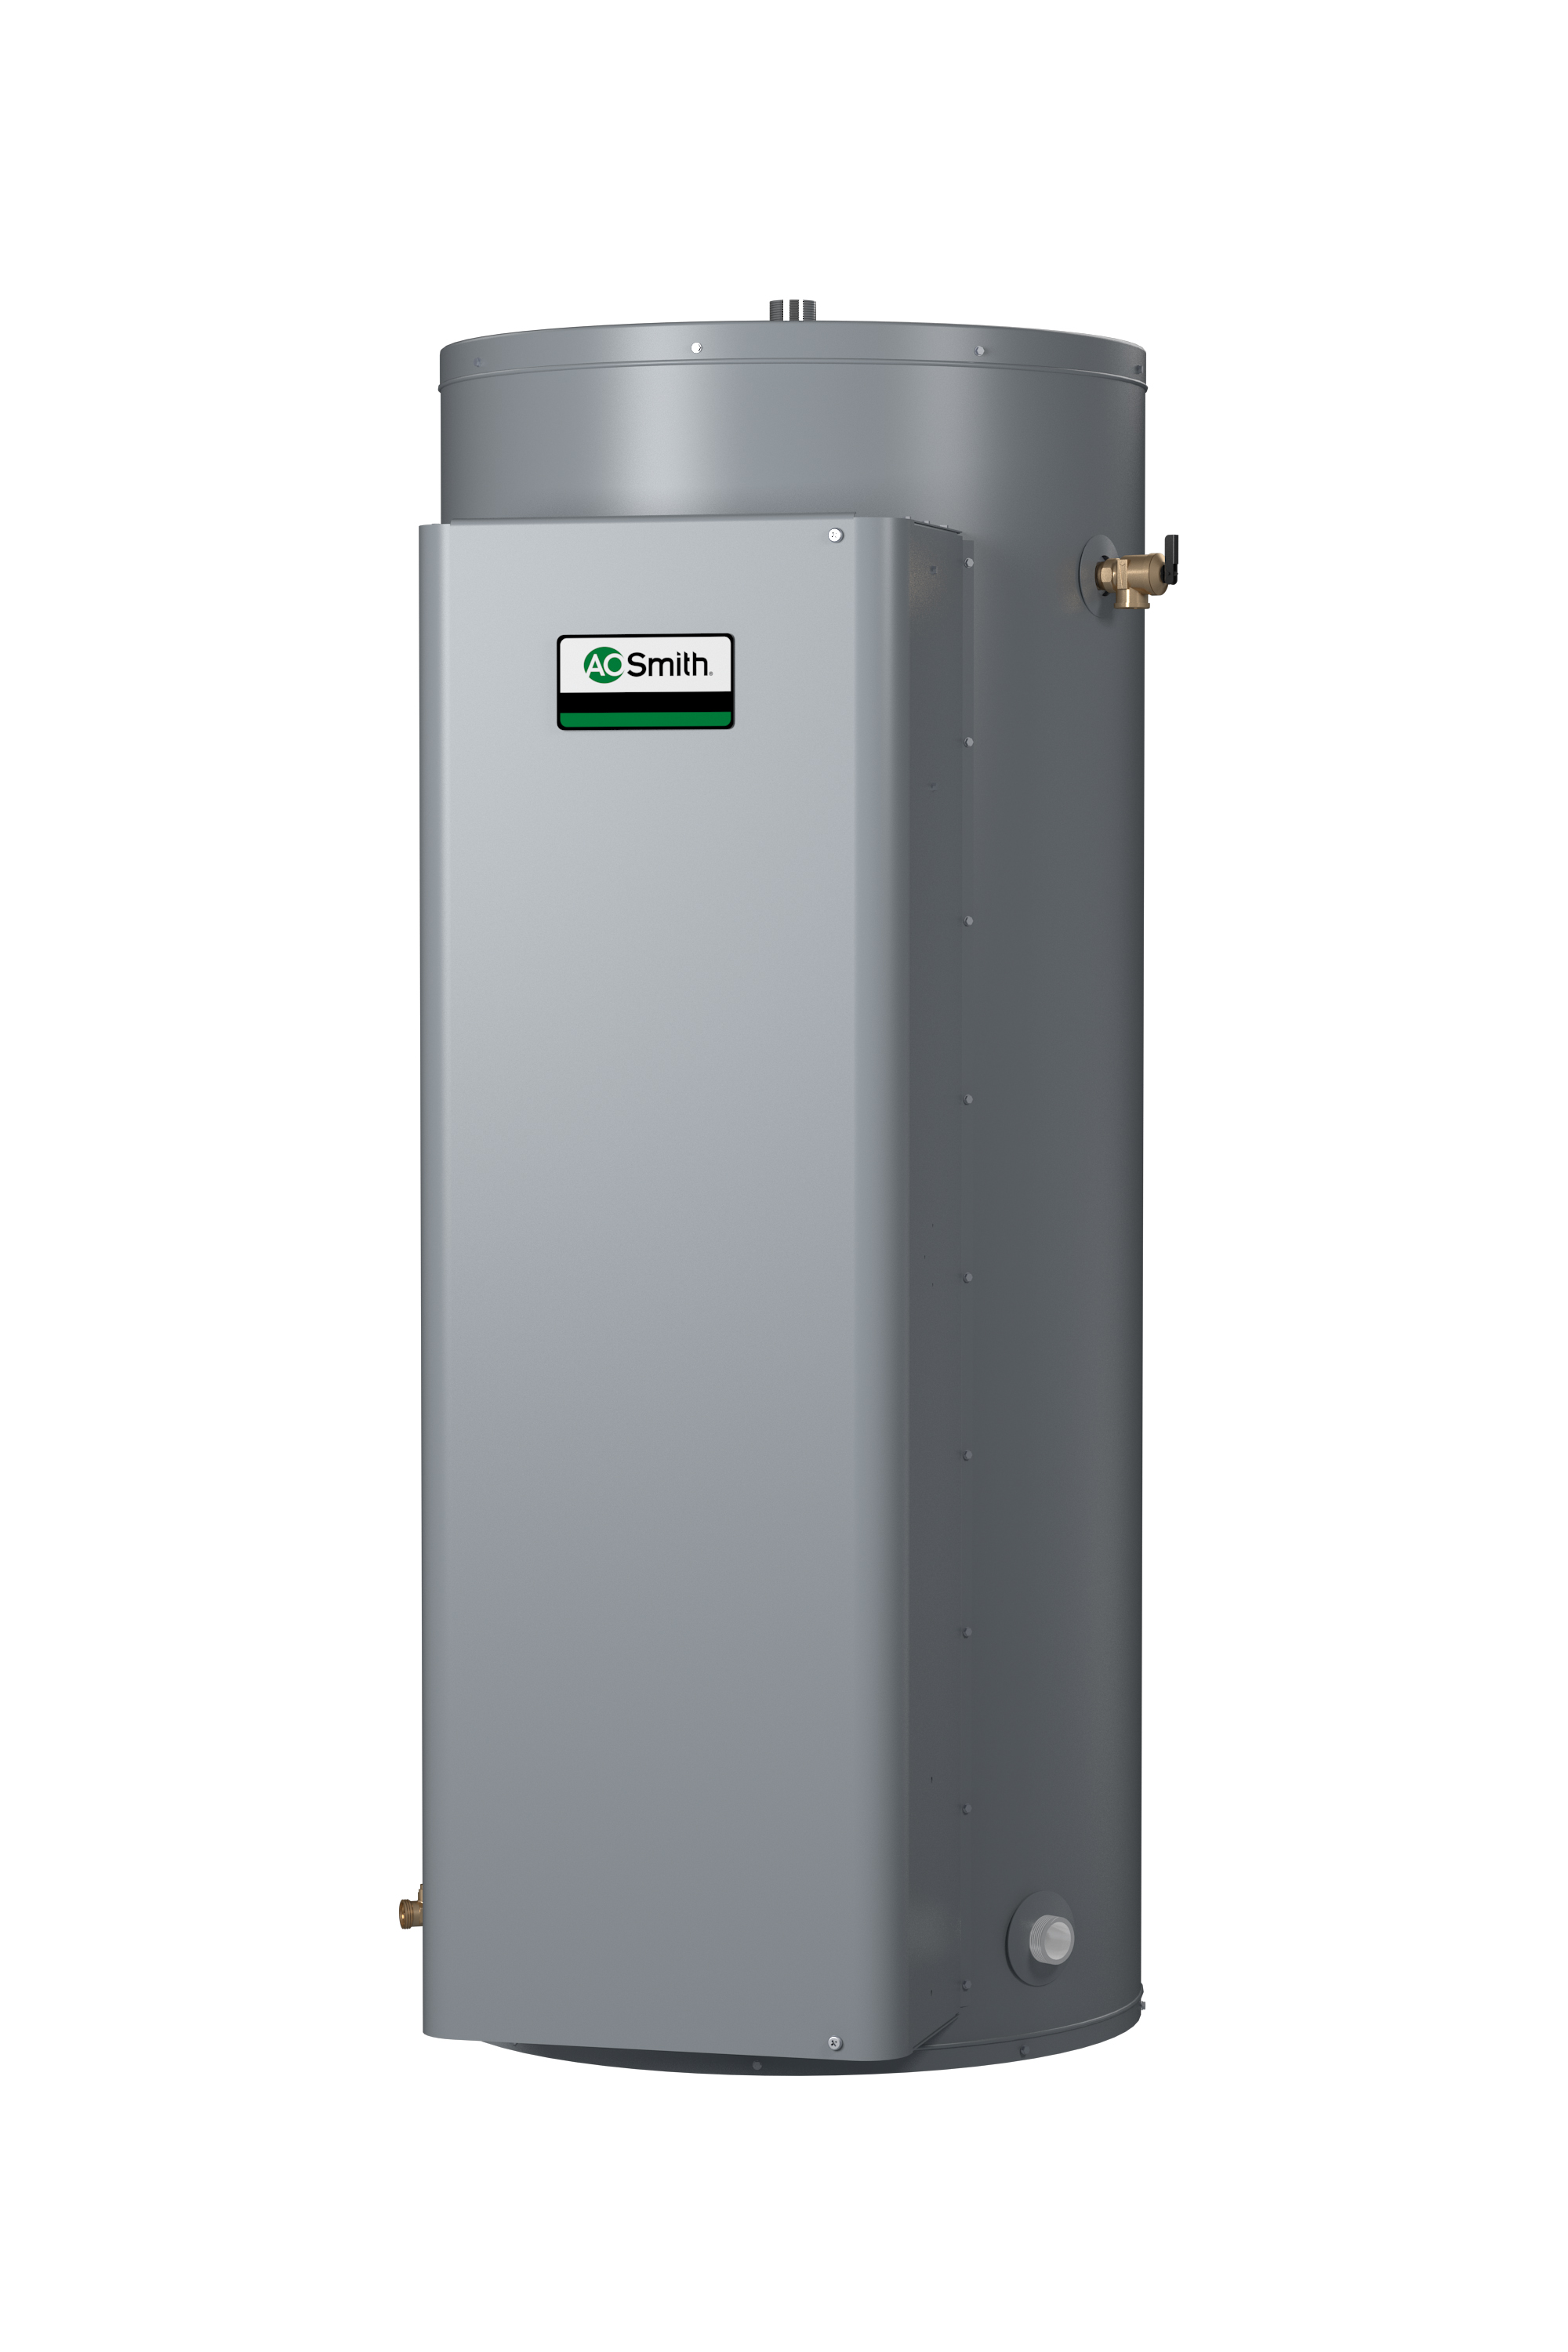 AO SMITH DRE-52-6, 50 GALLONS, 6.0KW, 480 VOLT, 7.22 AMPS, 3 PHASE, 3 ELEMENT, COMMERCIAL ELECTRIC WATER HEATER, GOLD SERIES